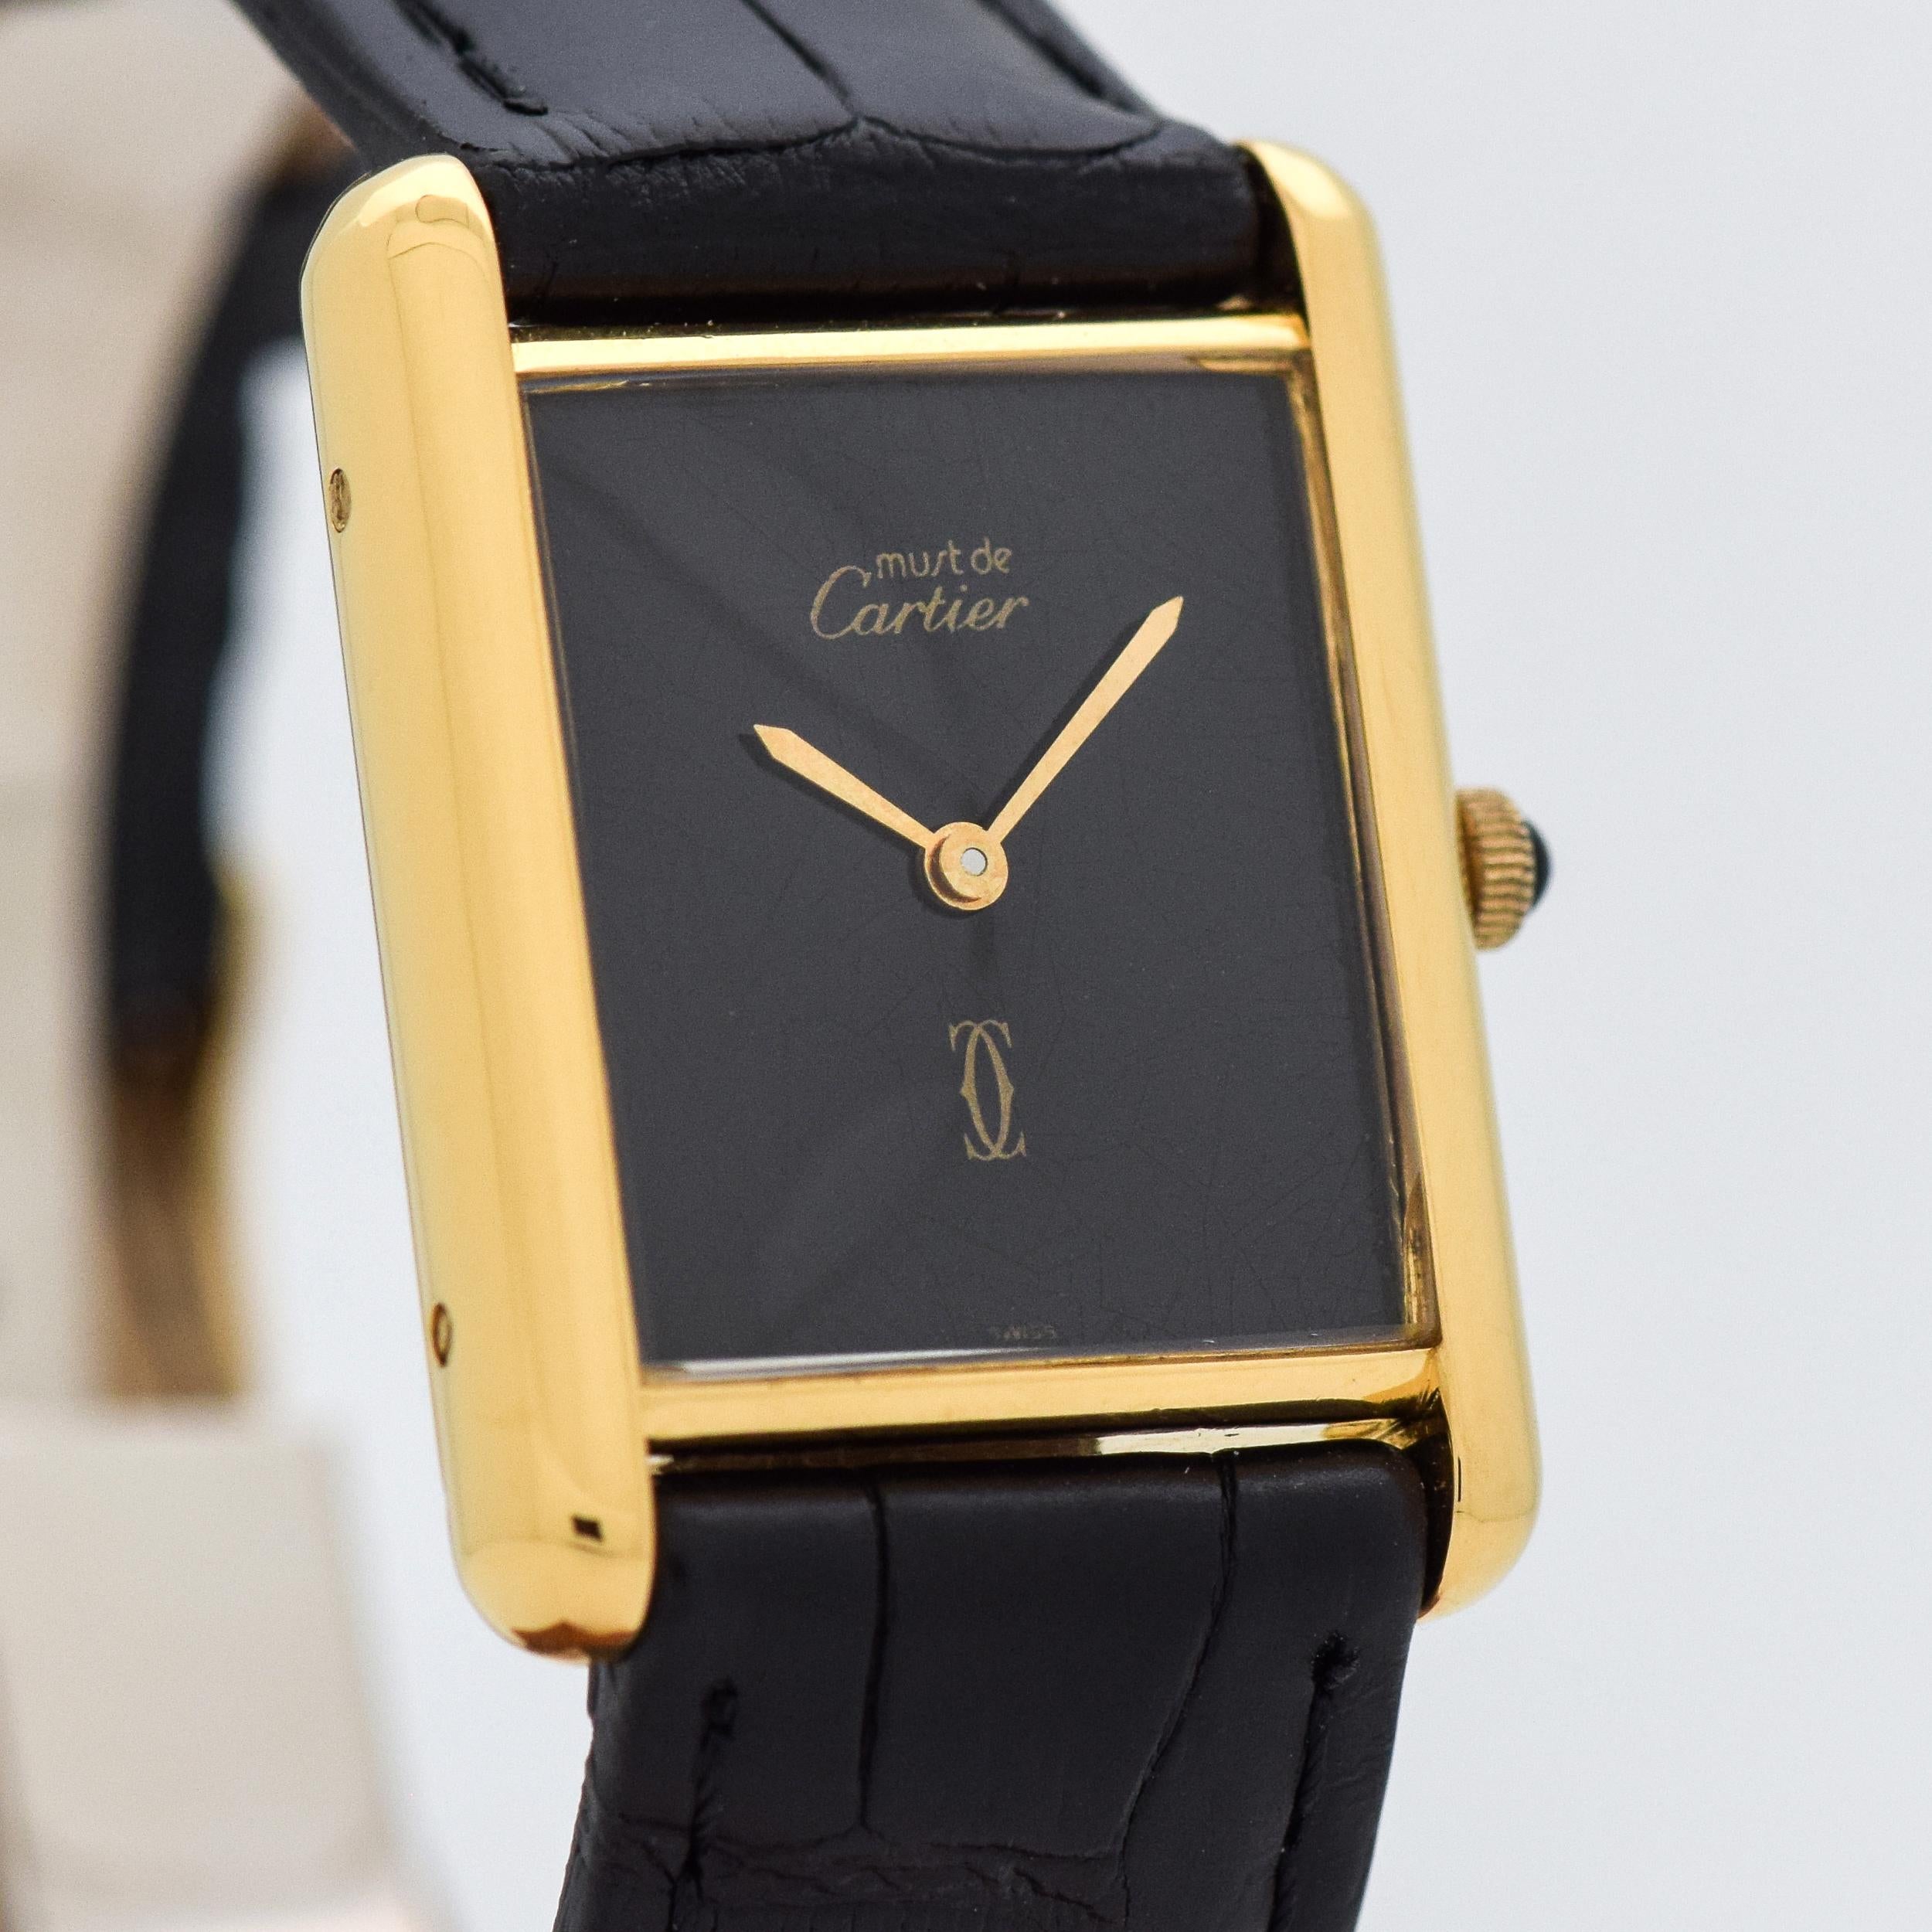 1990's Vintage Cartier Standard Men's Size Must de Cartier Tank 18k Yellow Gold Plated Over Sterling Silver watch wit Original Black Dial. Triple Singed. 23mm x 27mm lug to lug (0.91 in. x 1.06 in.) - 17 jewel, manual caliber ETA movement. Suitable